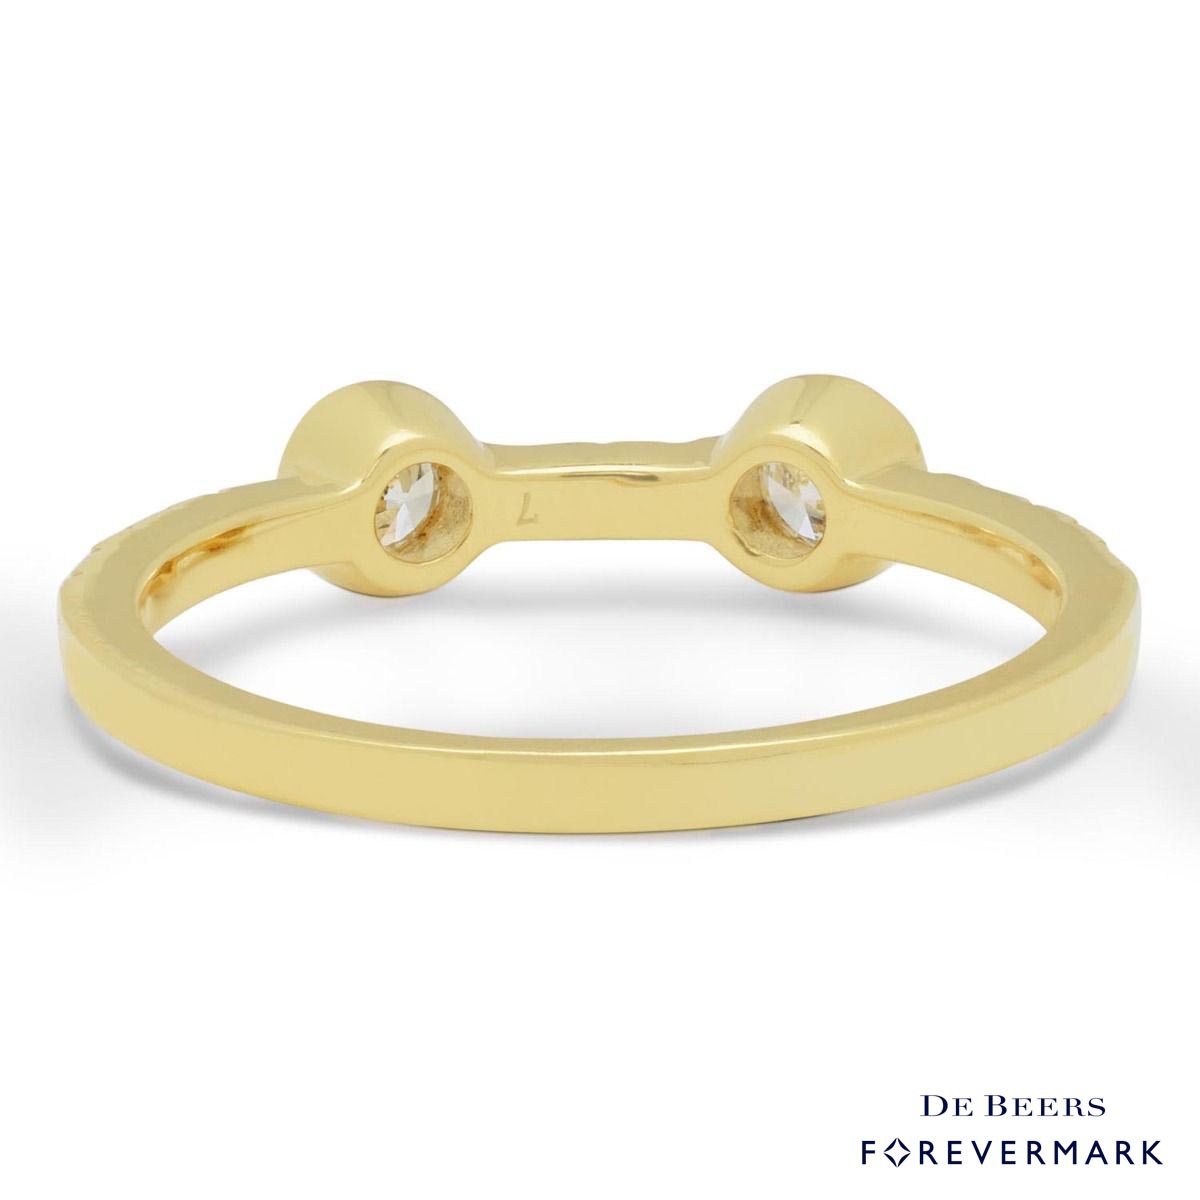 De Beers Forevermark Tribute Collection Diamond Stackable Ring in 18kt Yellow Gold (1/2ct tw)